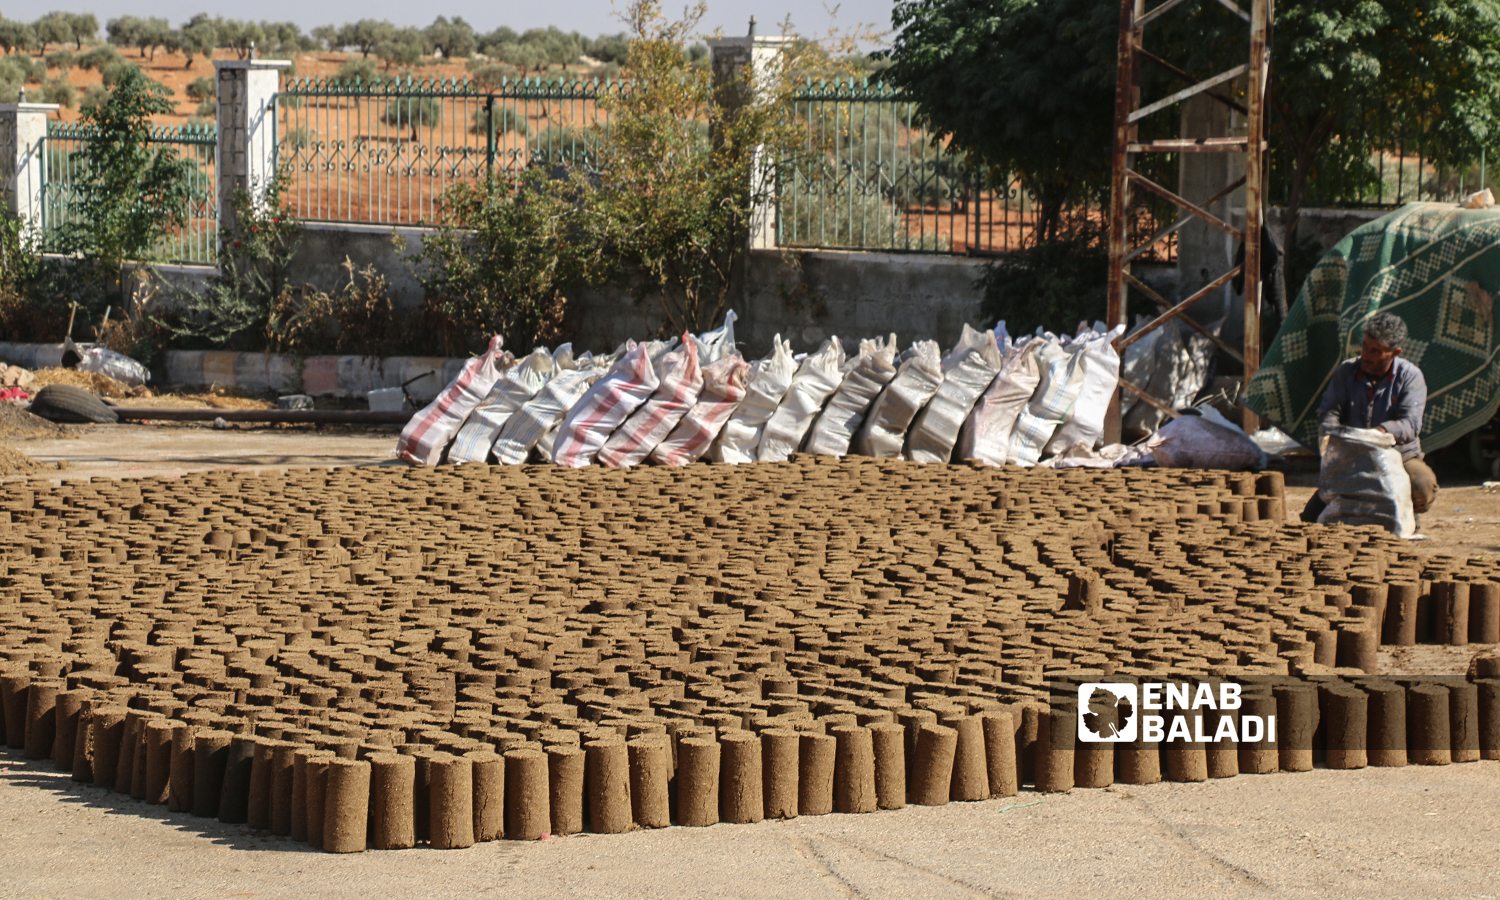 Pomace-wood pellets made from the waste of olive oil and used for heating during winter at Maarat al-Ikhwan in the northern Idlib countryside - 18 October 2021 (Enab Baladi/Iyad Abdul Jawad)
